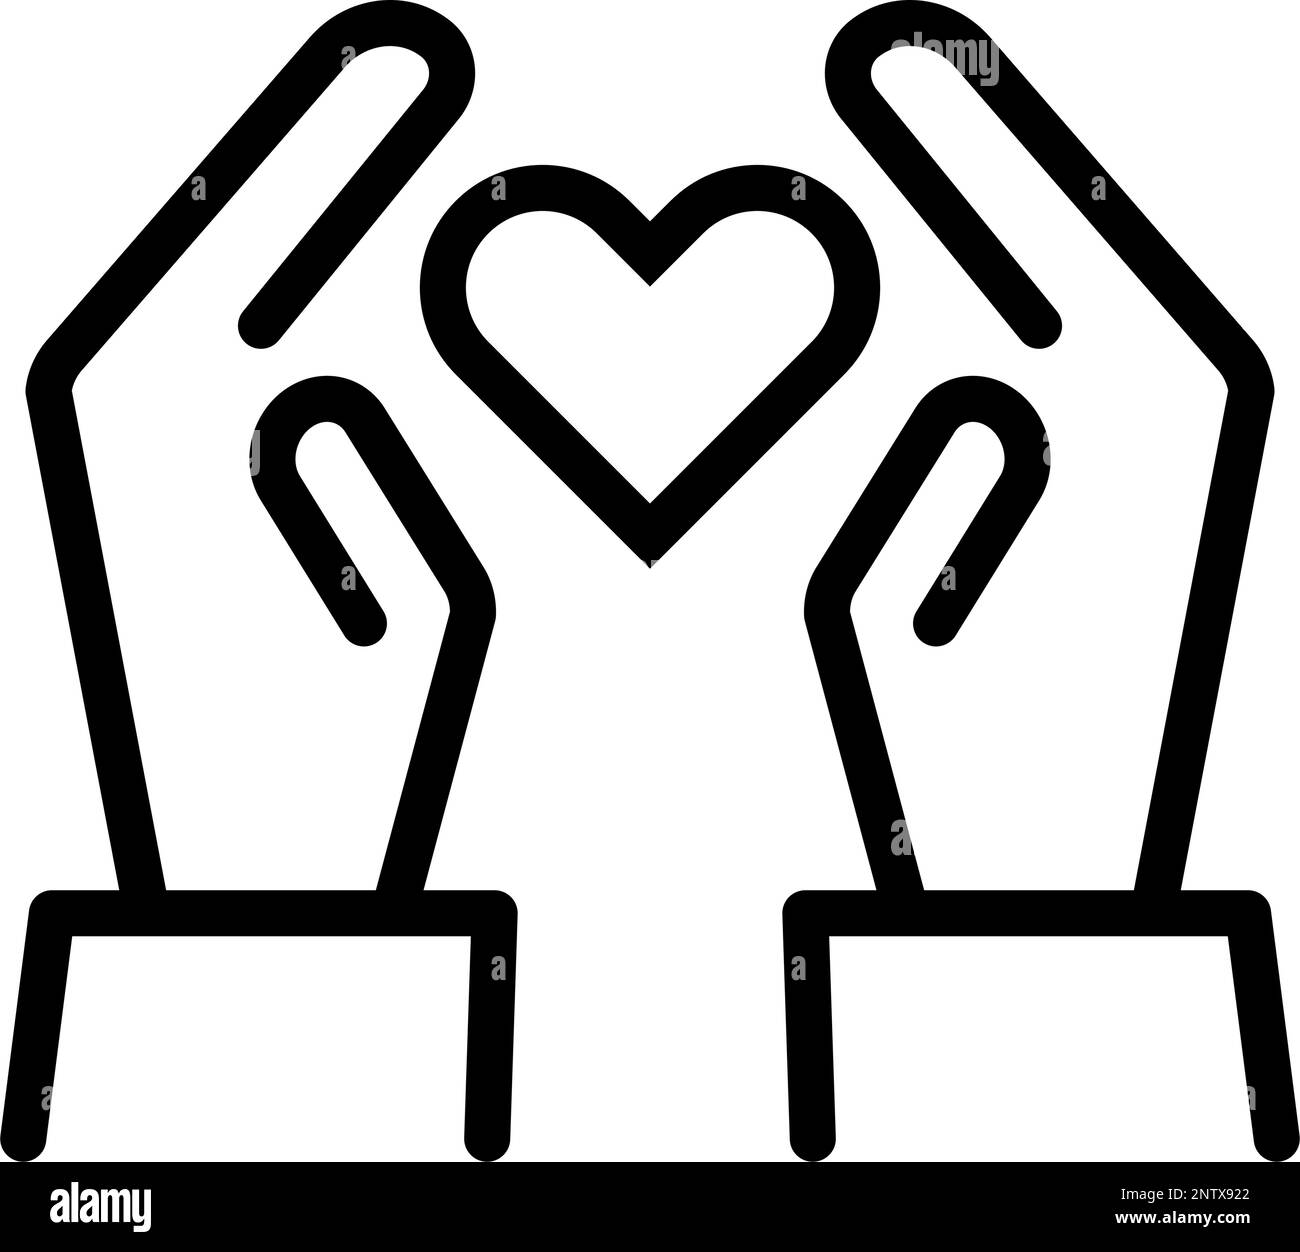 Heart gently wrapped in a hand icon. Love. Editable vector. Stock Vector